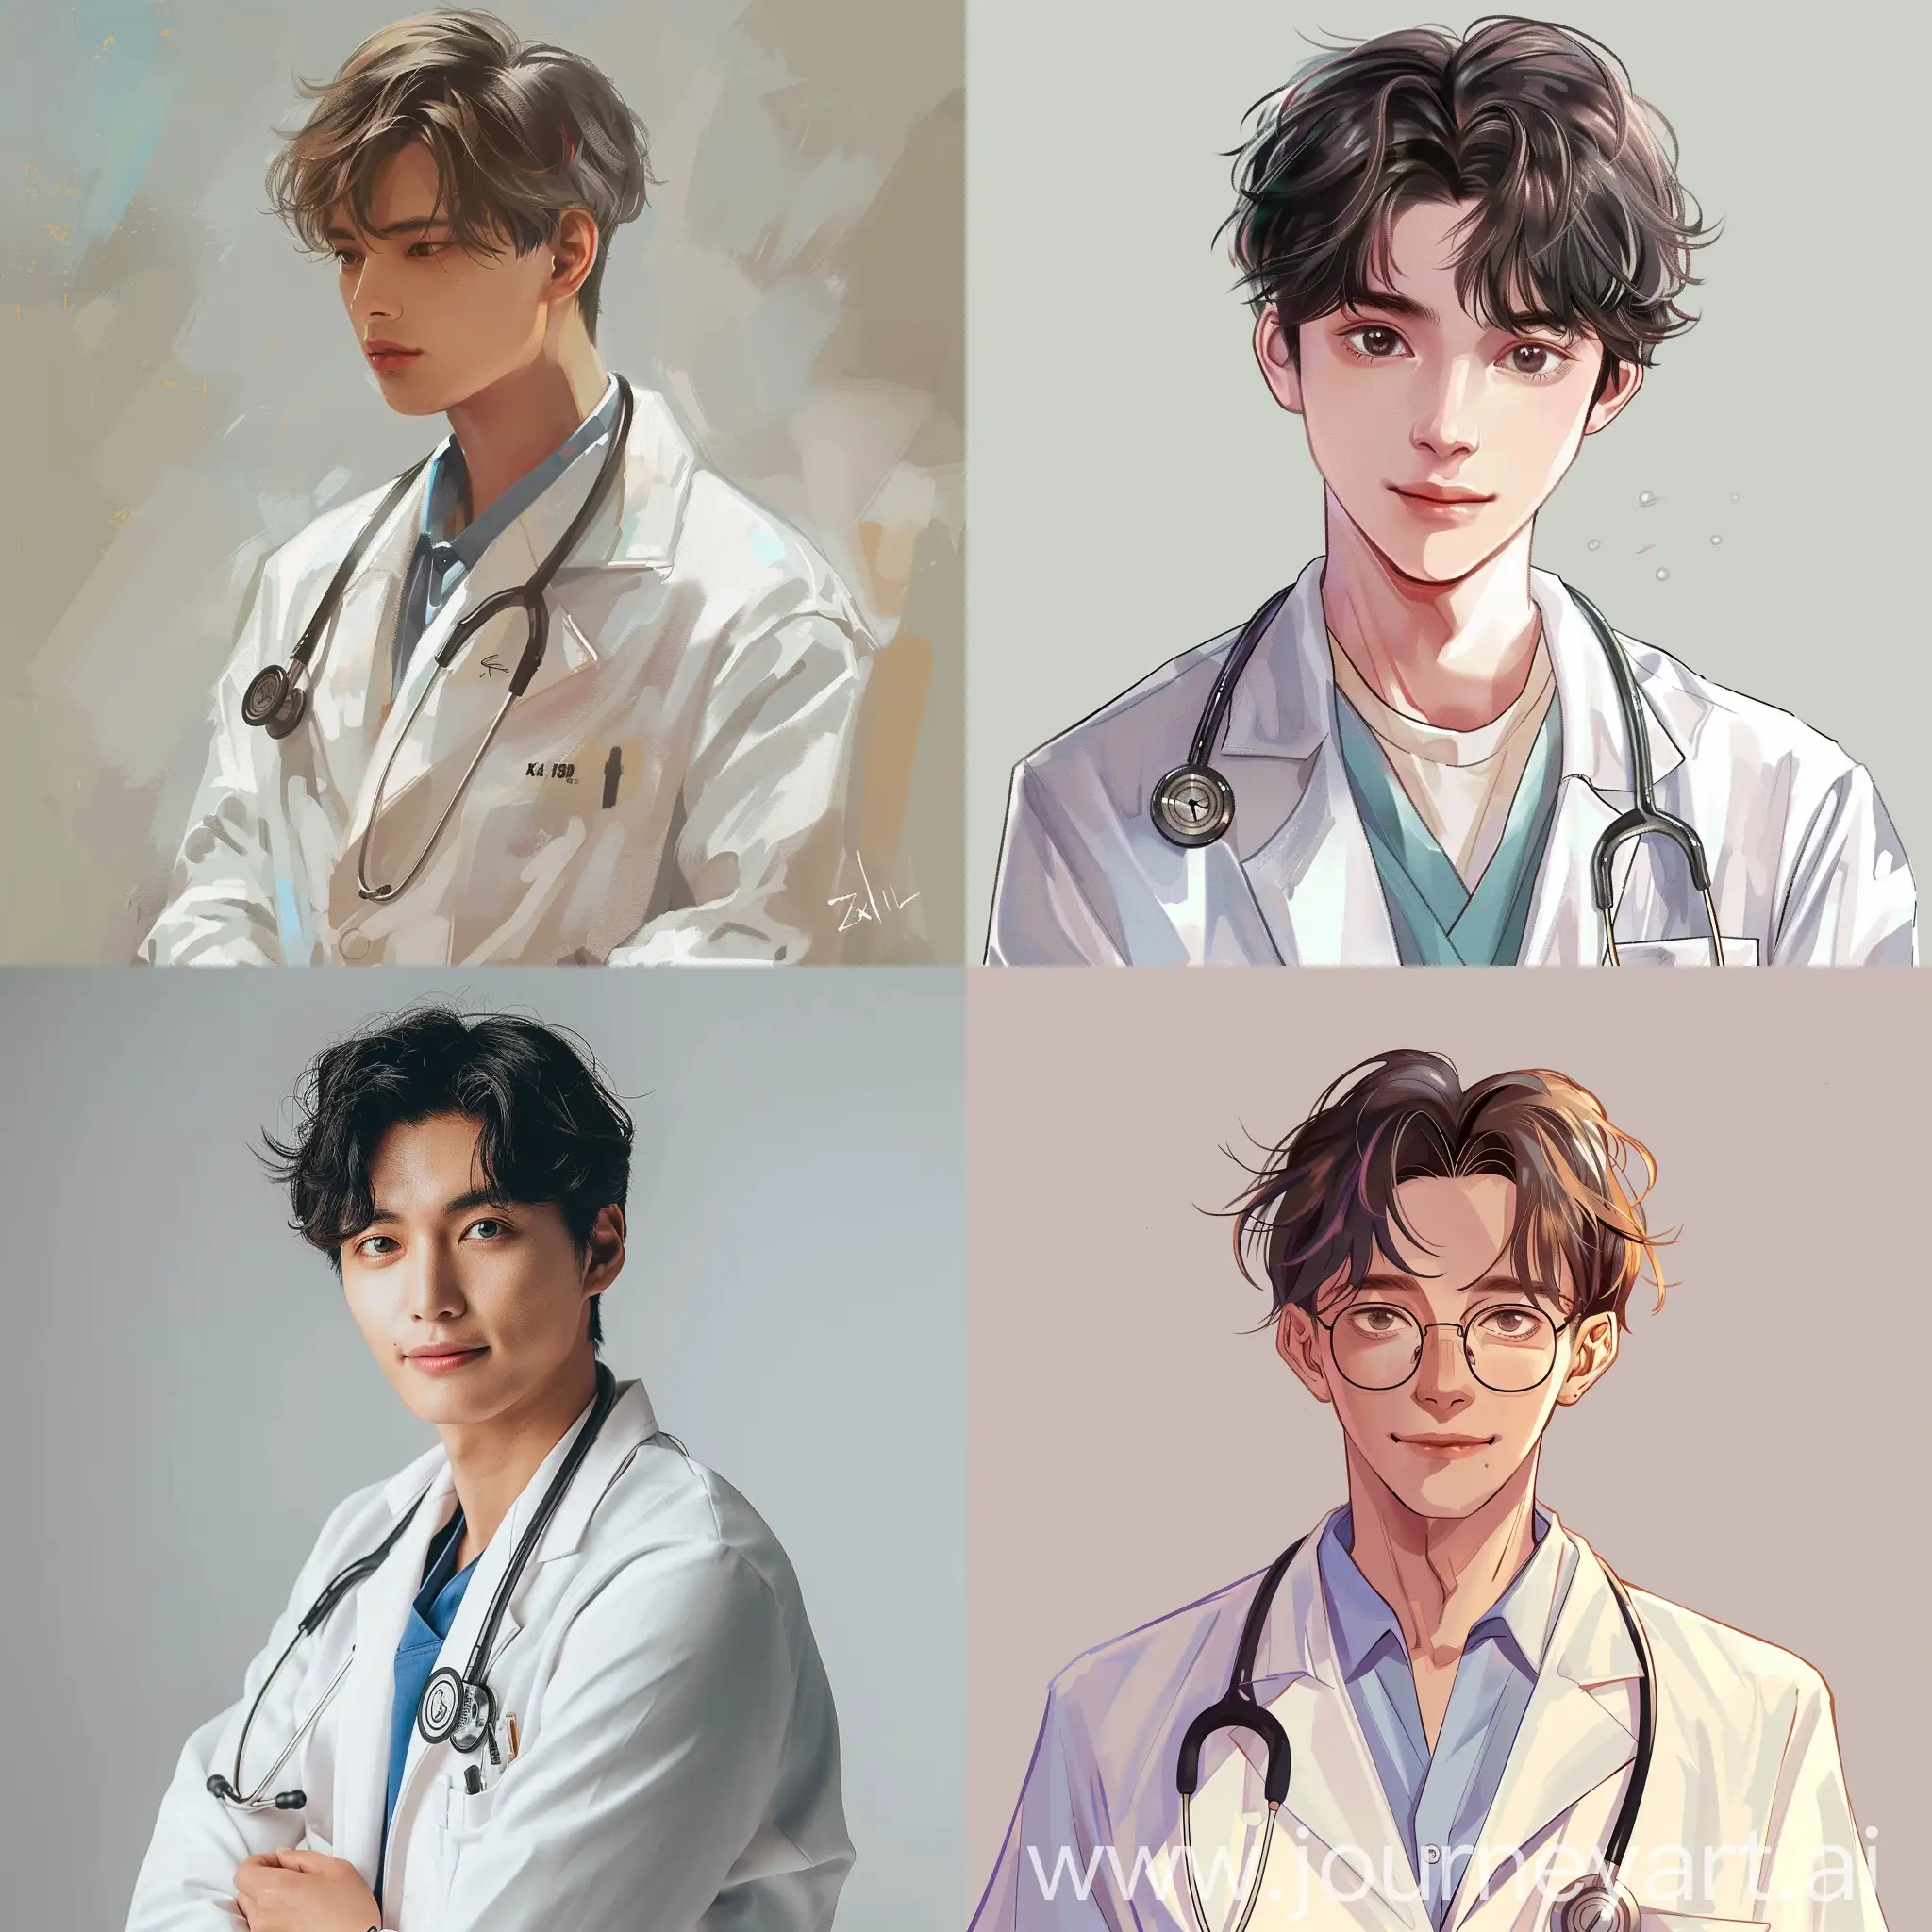 Kai-from-Exo-as-Doctor-Portrait-of-a-Caring-Celebrity-Physician